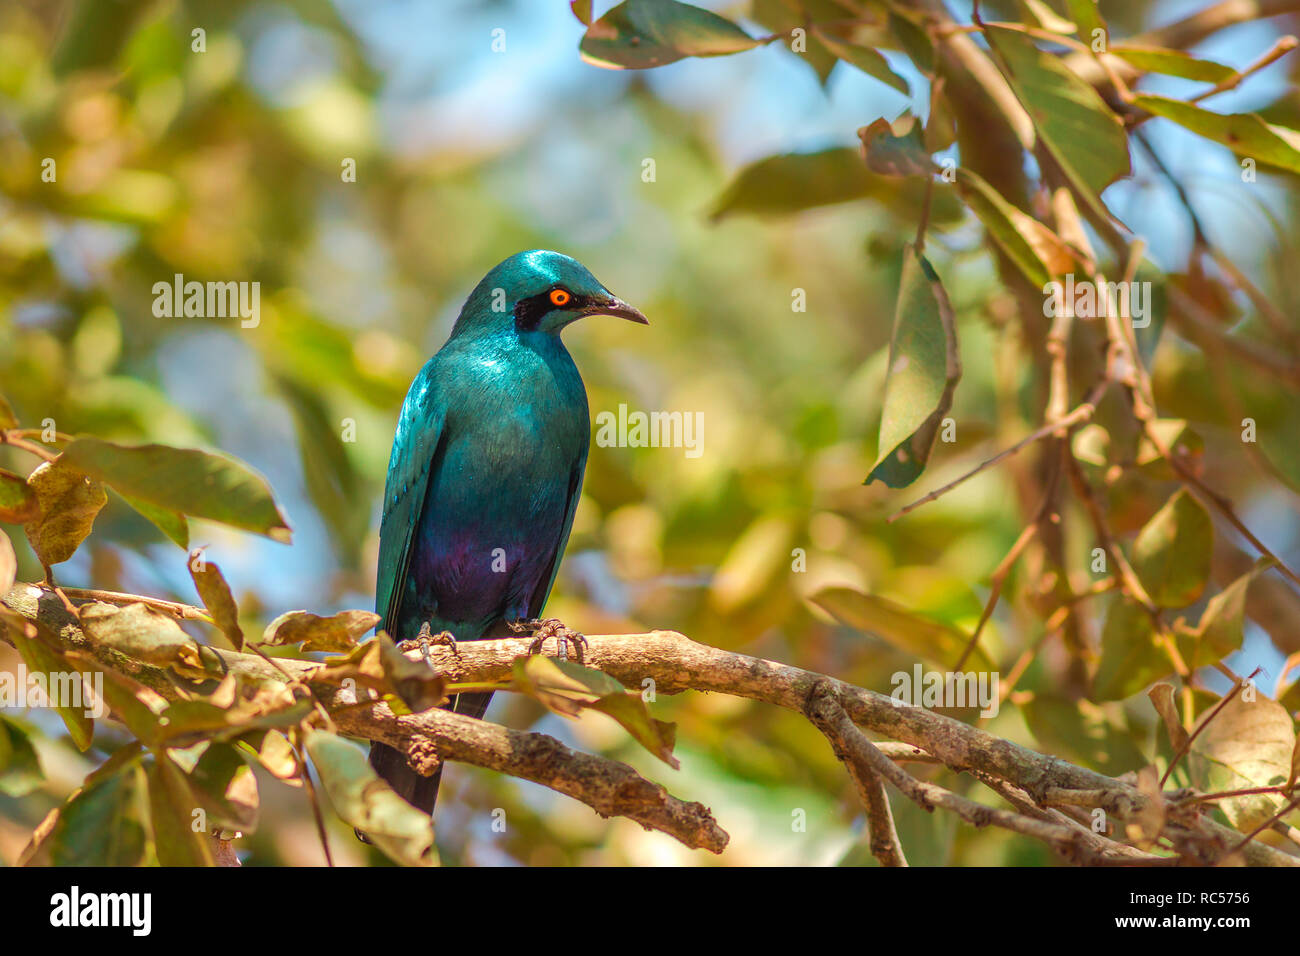 Cape starling on a tree in Kruger National Park, South Africa. Red-shouldered glossy-starling or Cape glossy starling. Lamprotornis nitens species. Stock Photo